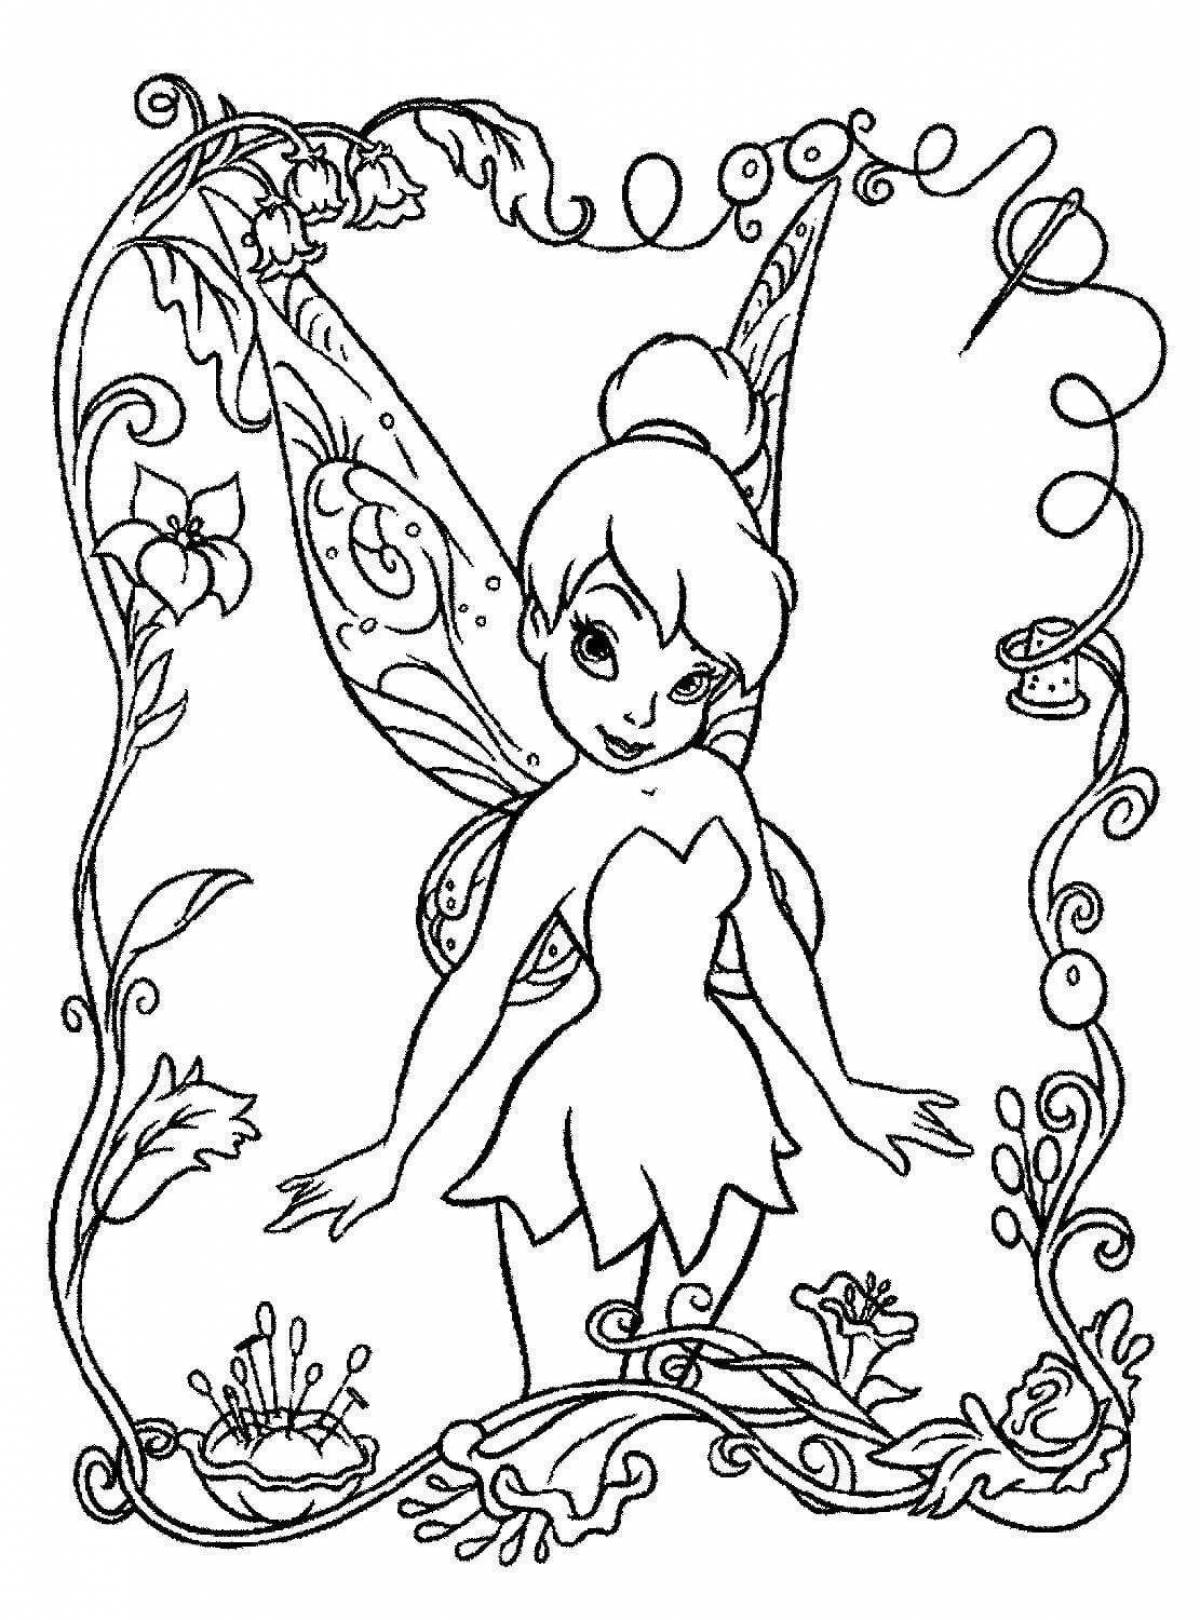 Blissful fairy coloring book